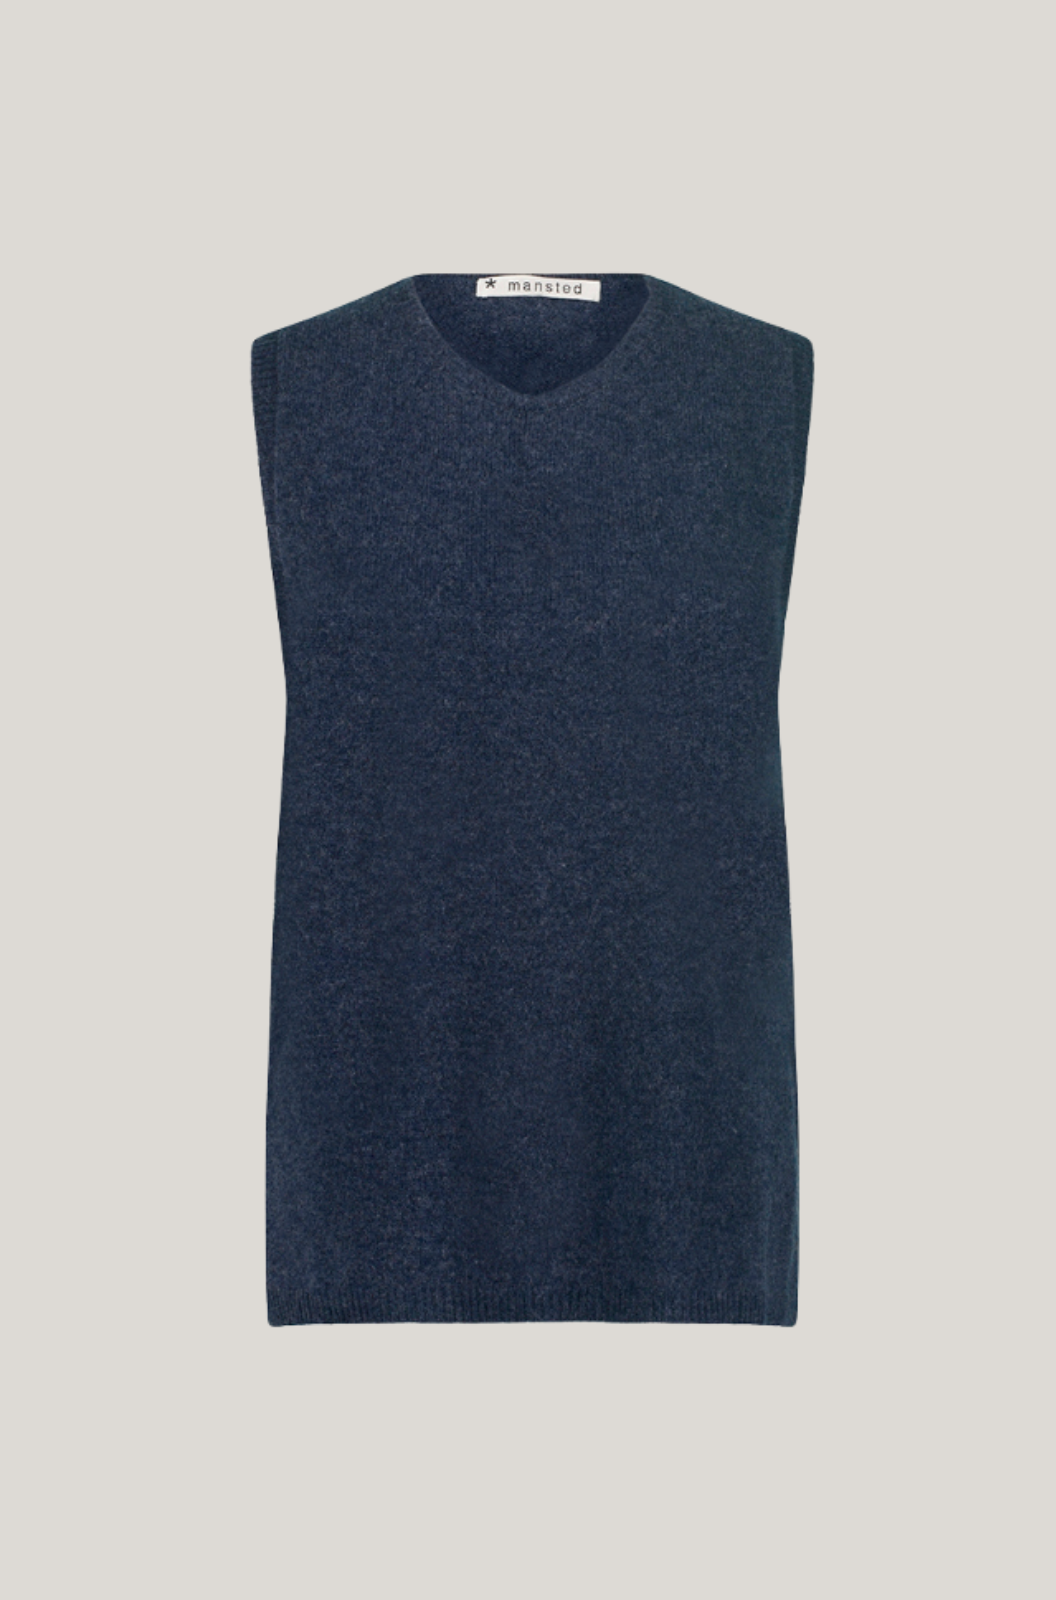 Mansted Denmark Mitos Lambswool Crew Vest in Soft Blue